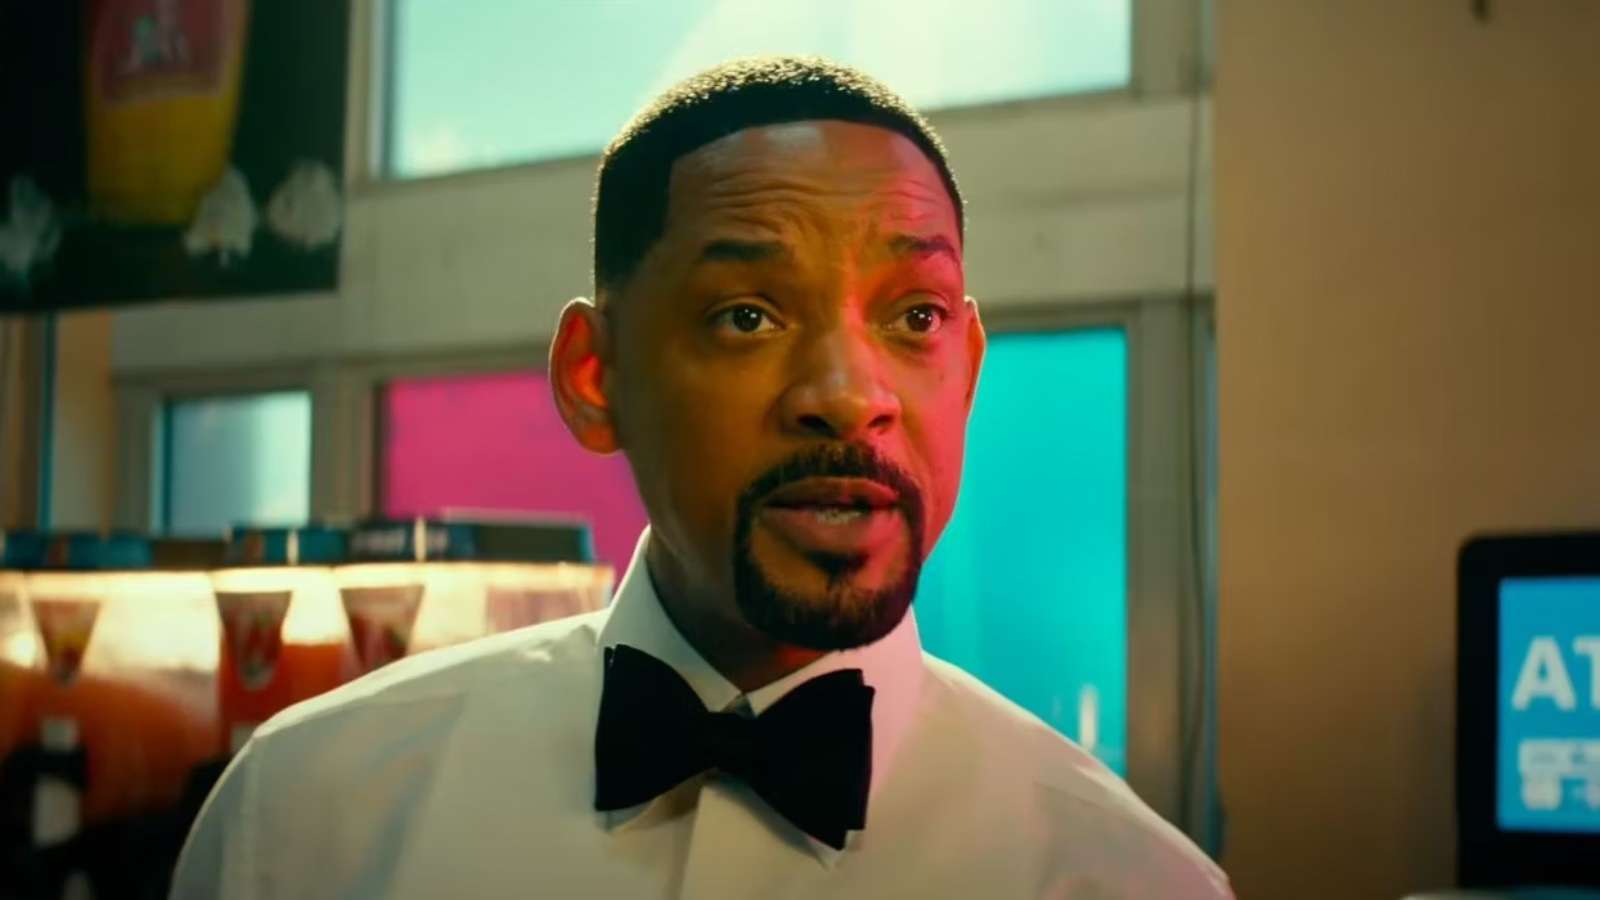 Will Smith in Bad Boys 4 as Mike Lowrey.